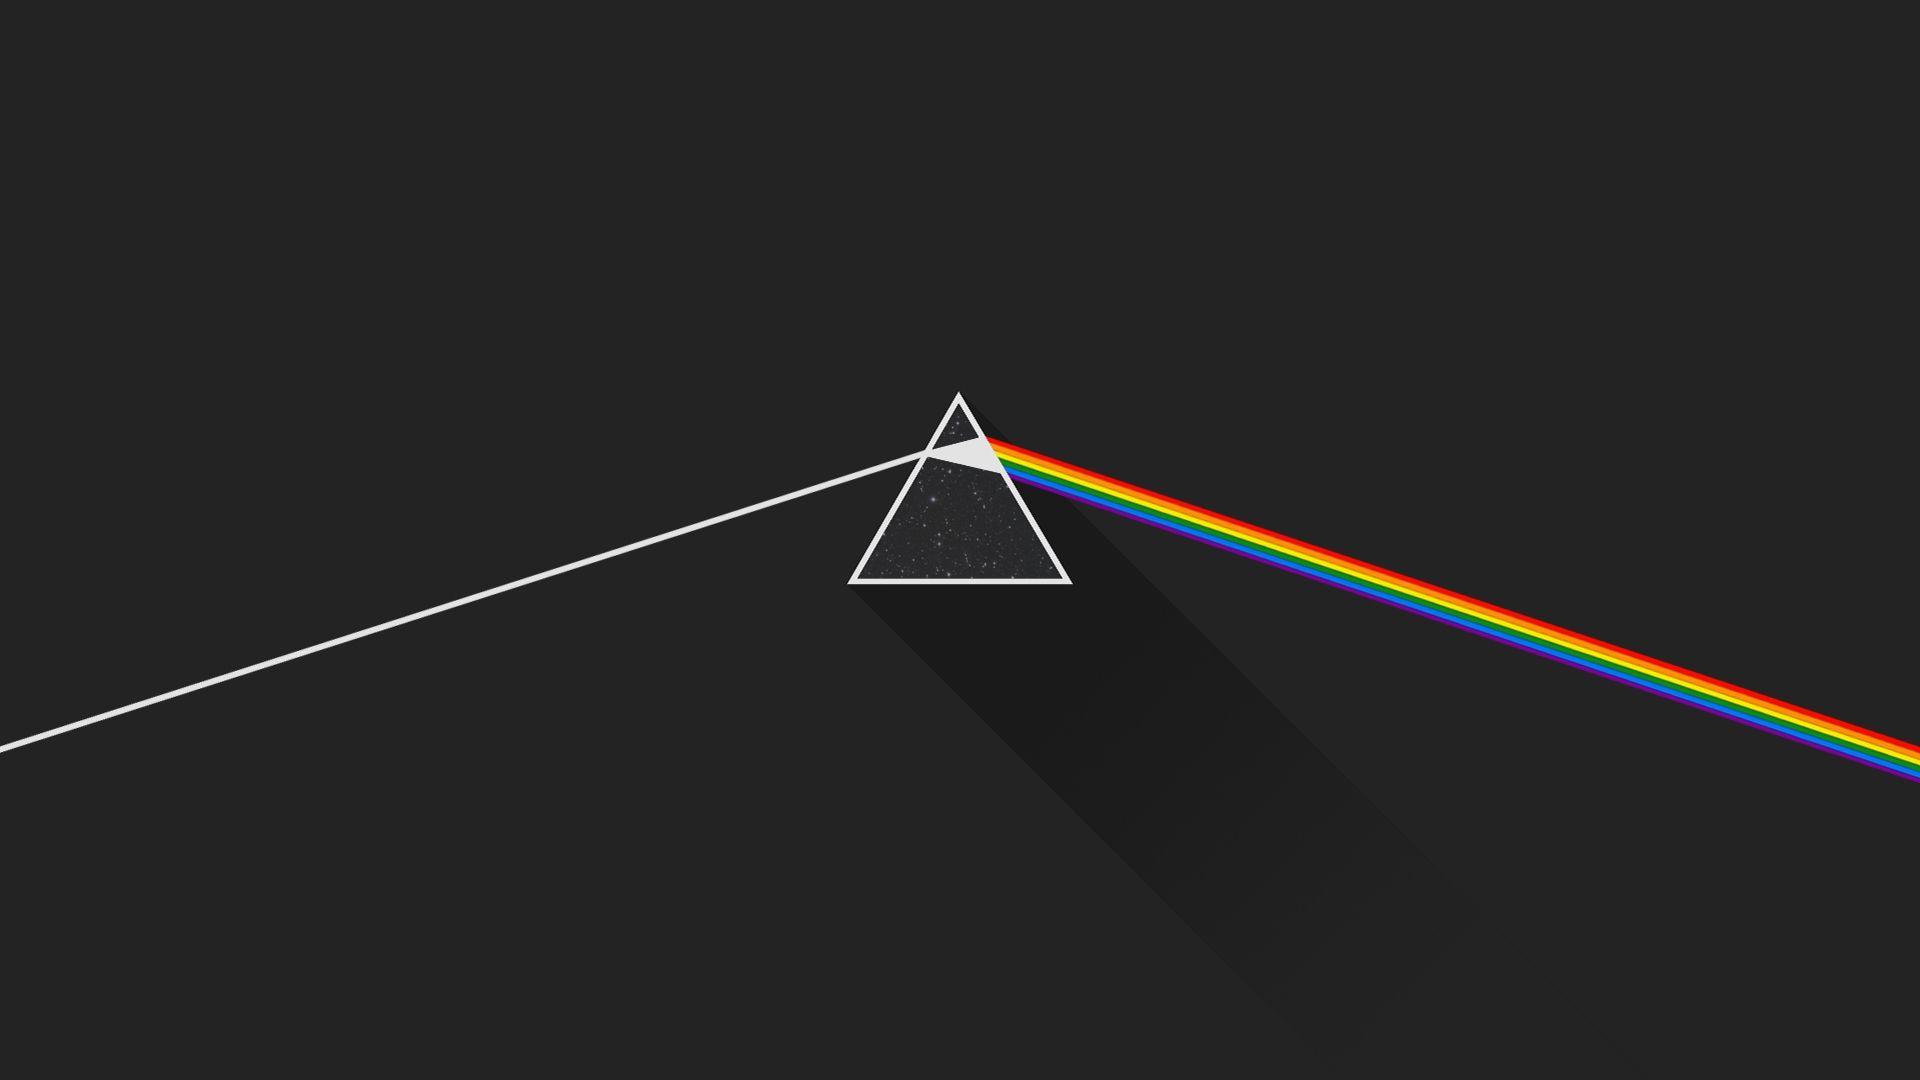 10 Most Popular Dark Side Of The Moon Wallpapers FULL HD 1080p For PC